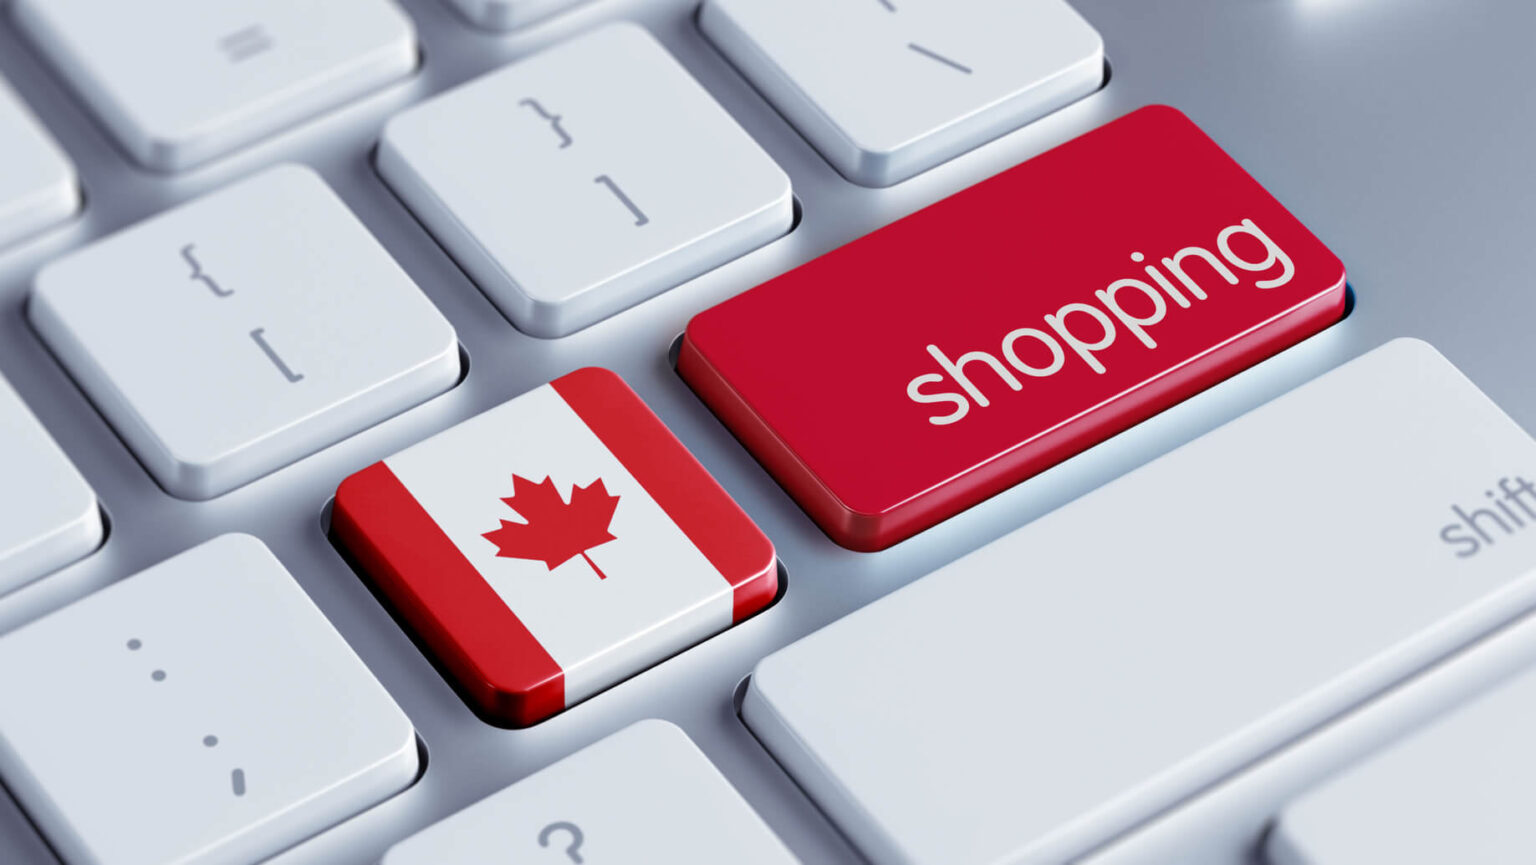 Canadian Online Stores